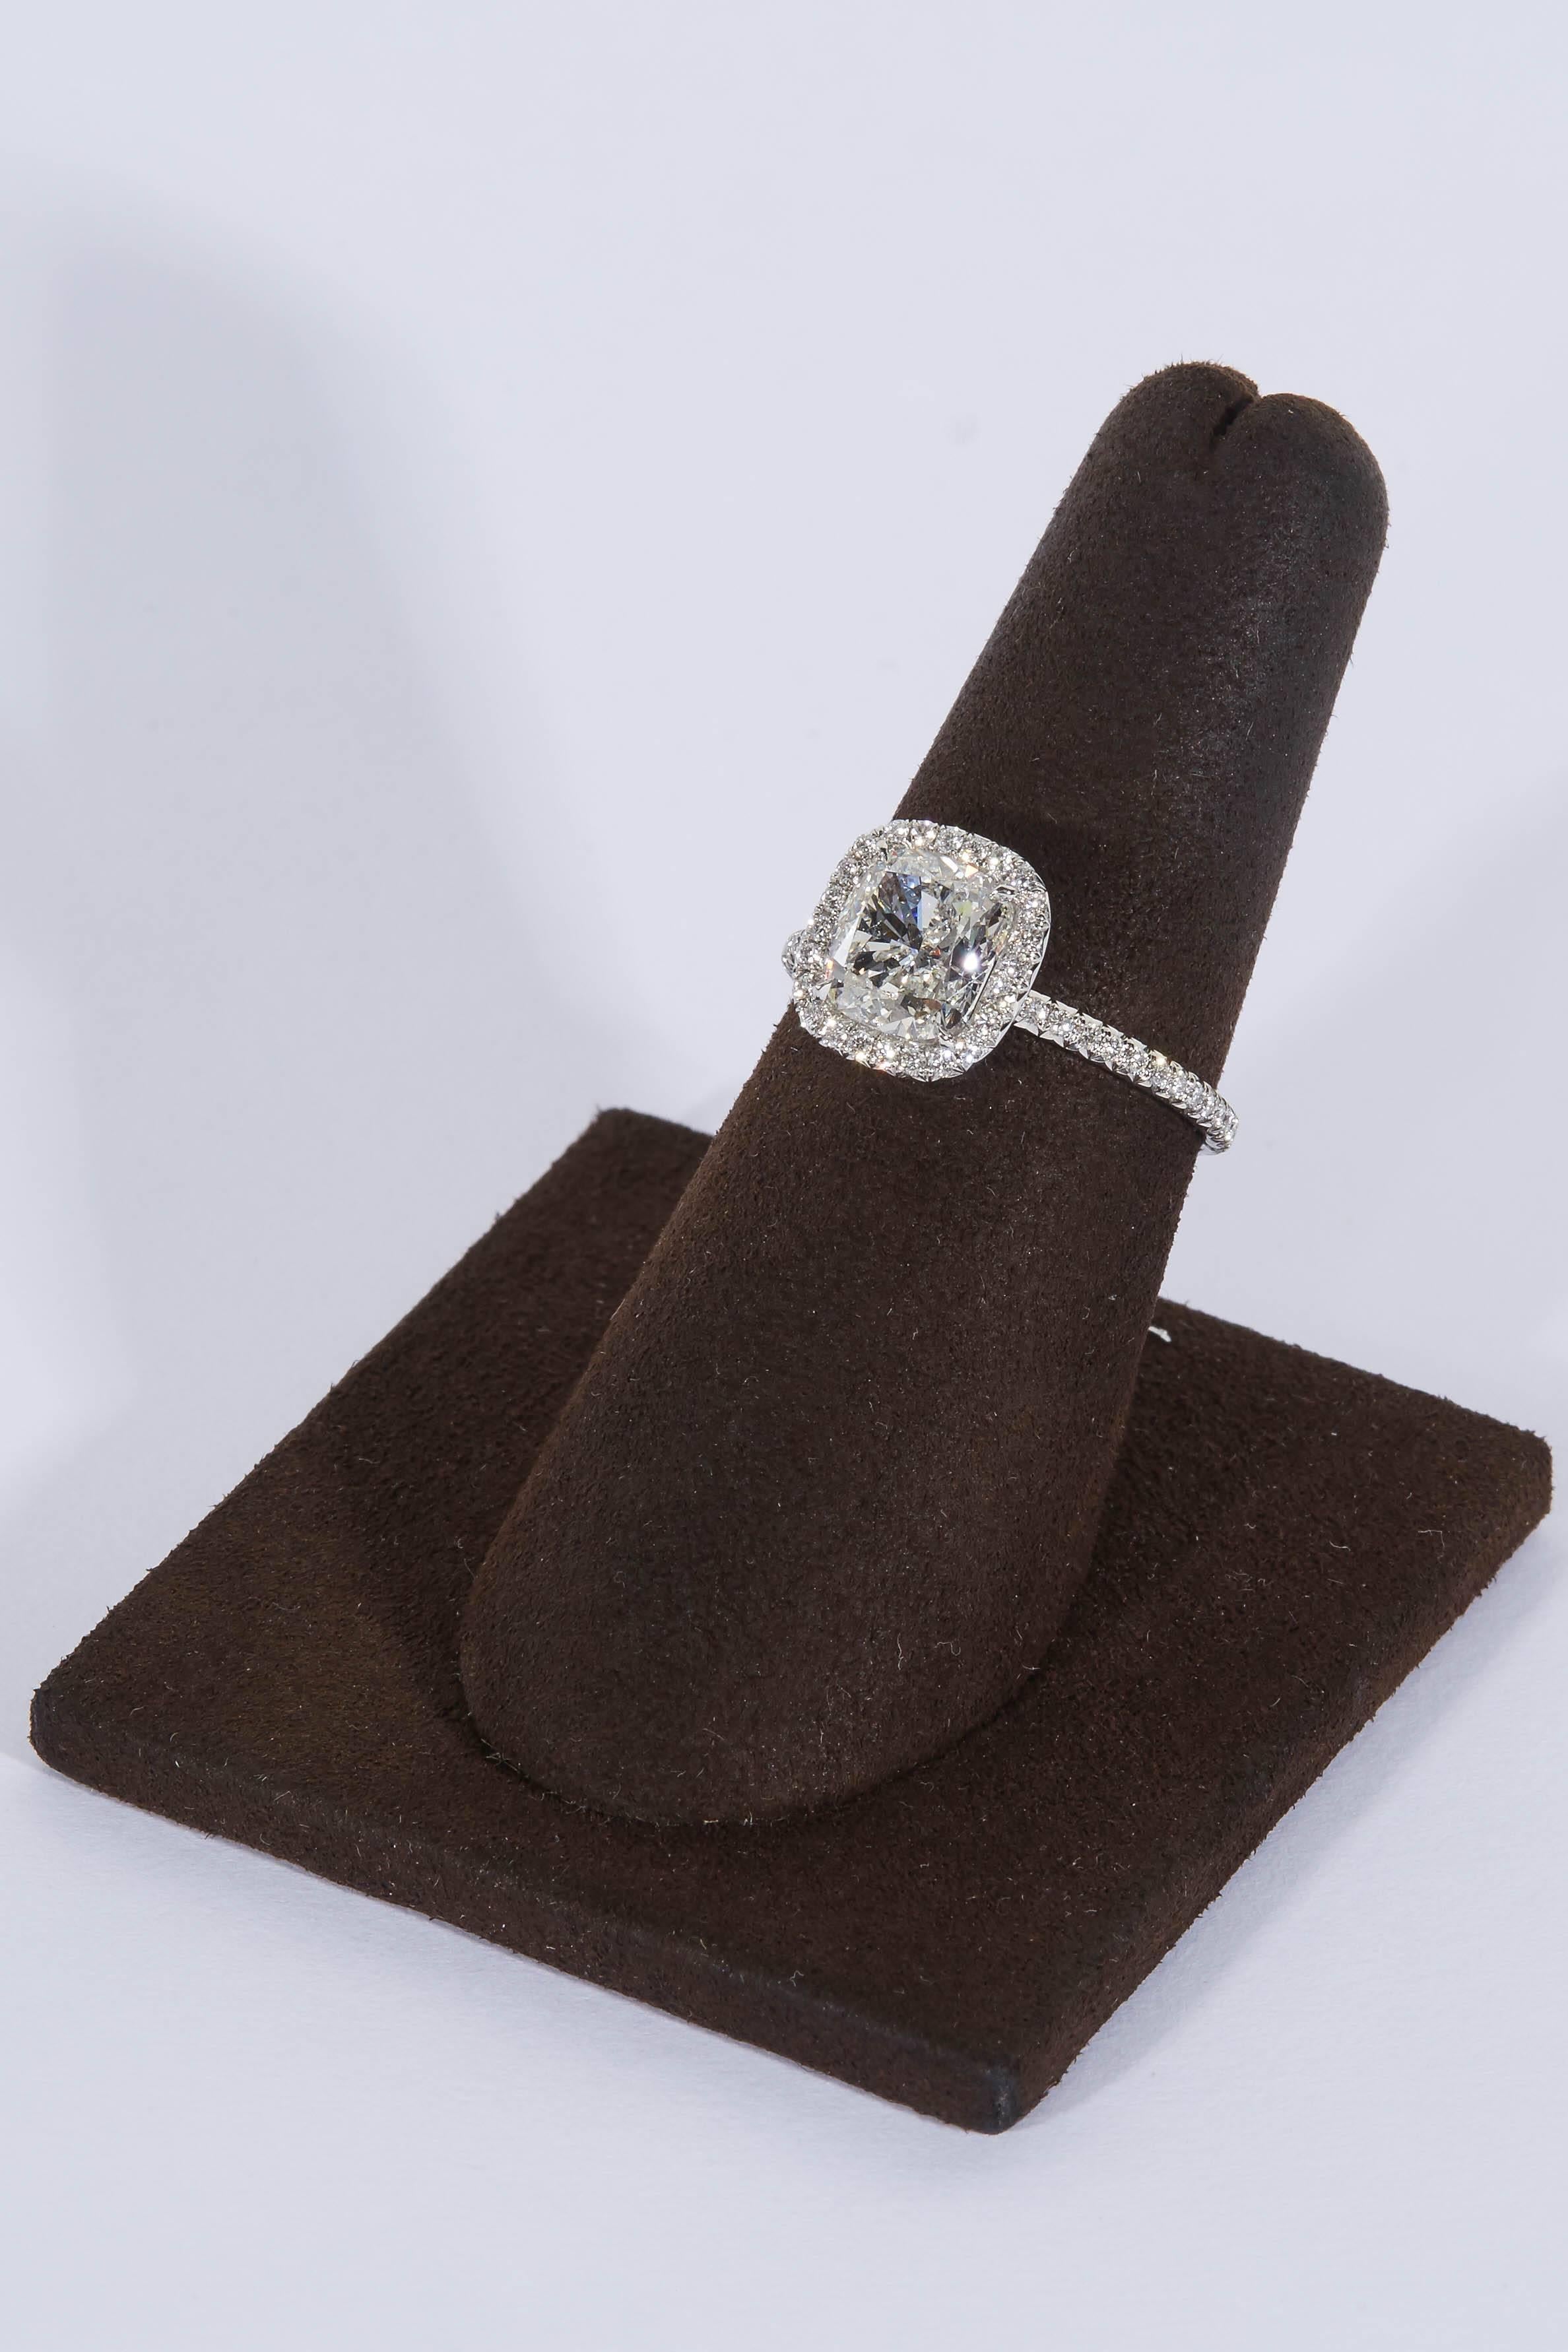 
A hand crafted delicate diamond halo mounting with a fabulous 2.04 carat center diamond.

2.04 carat H color SI1 GIA certified cushion cut diamond

.50 cts of round brilliant cut diamonds

Platinum

Currently a size 6 but can be resized,